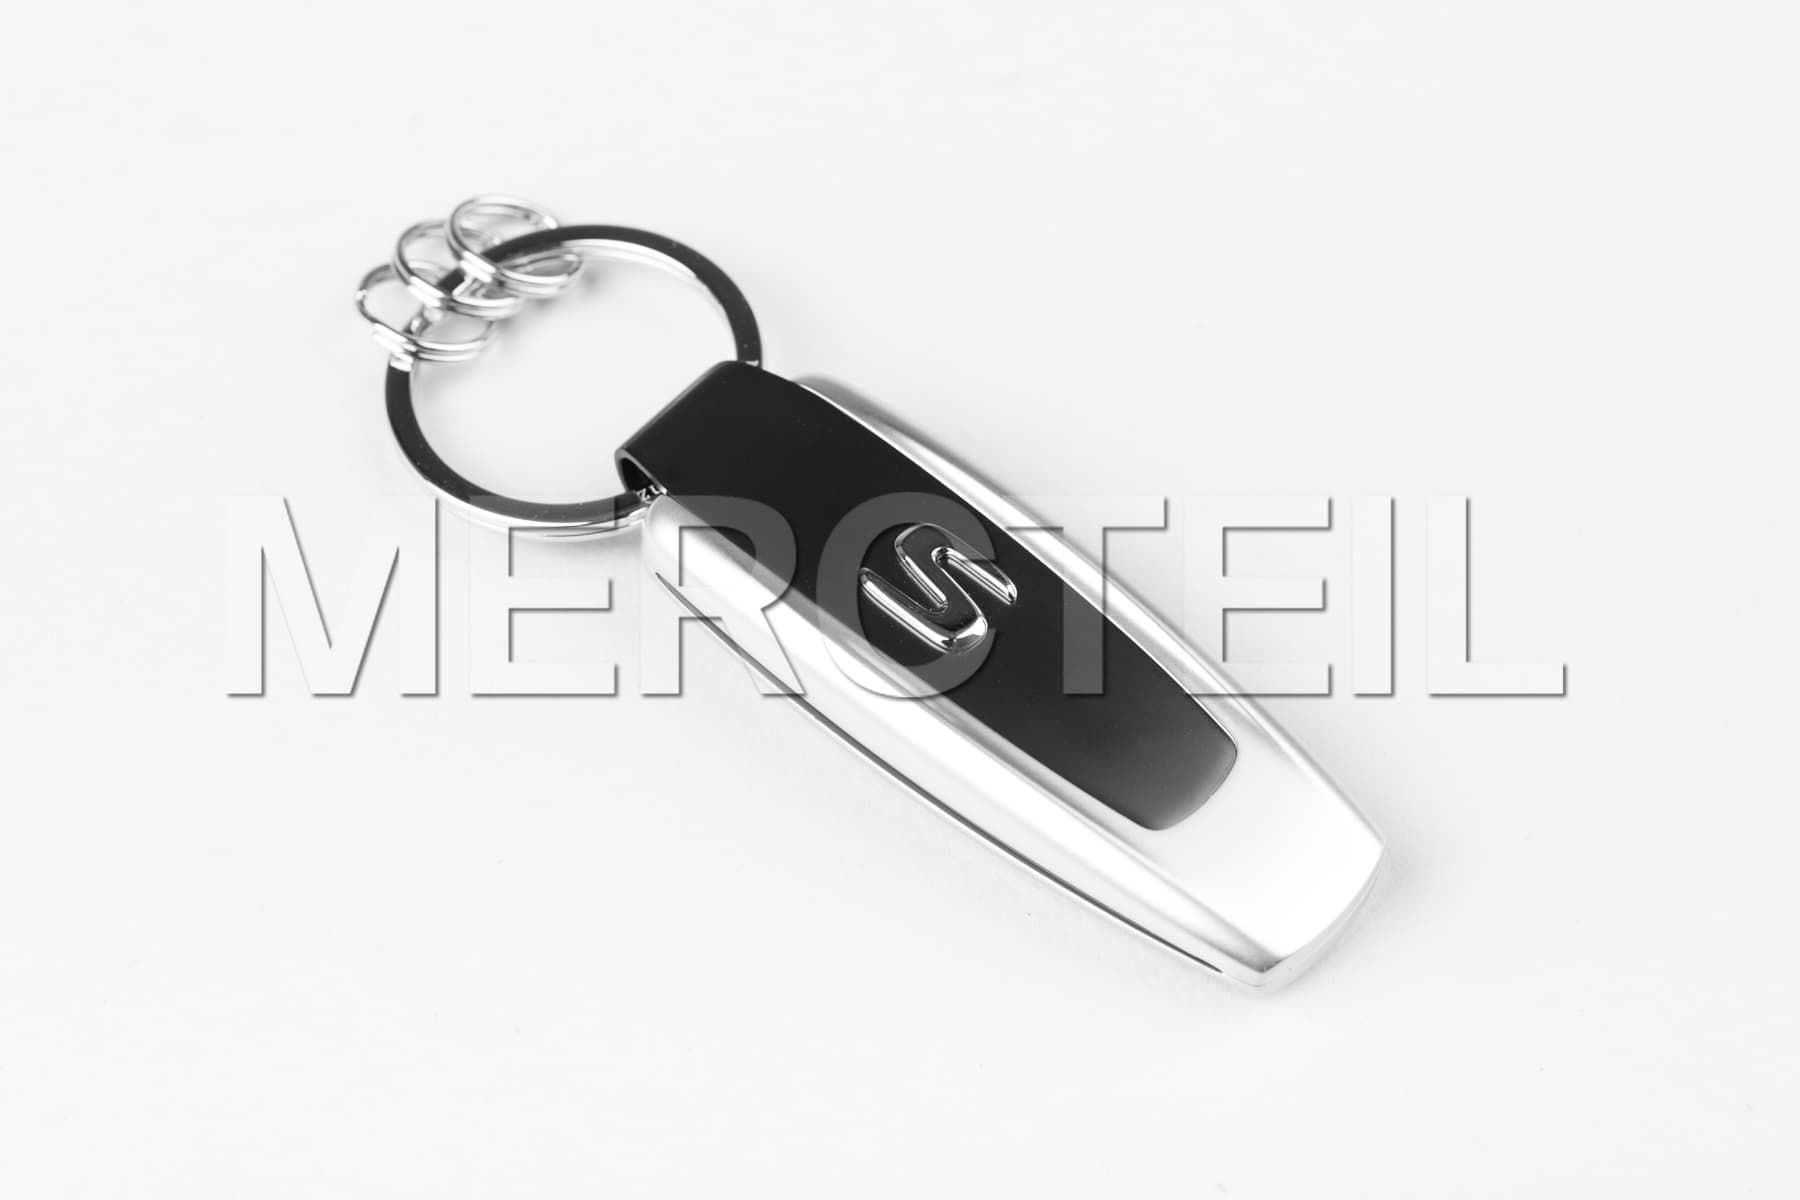 S-Class Model Series Black Silver Keychain Key Ring Genuine Mercedes-Benz (Part number: B66958419)